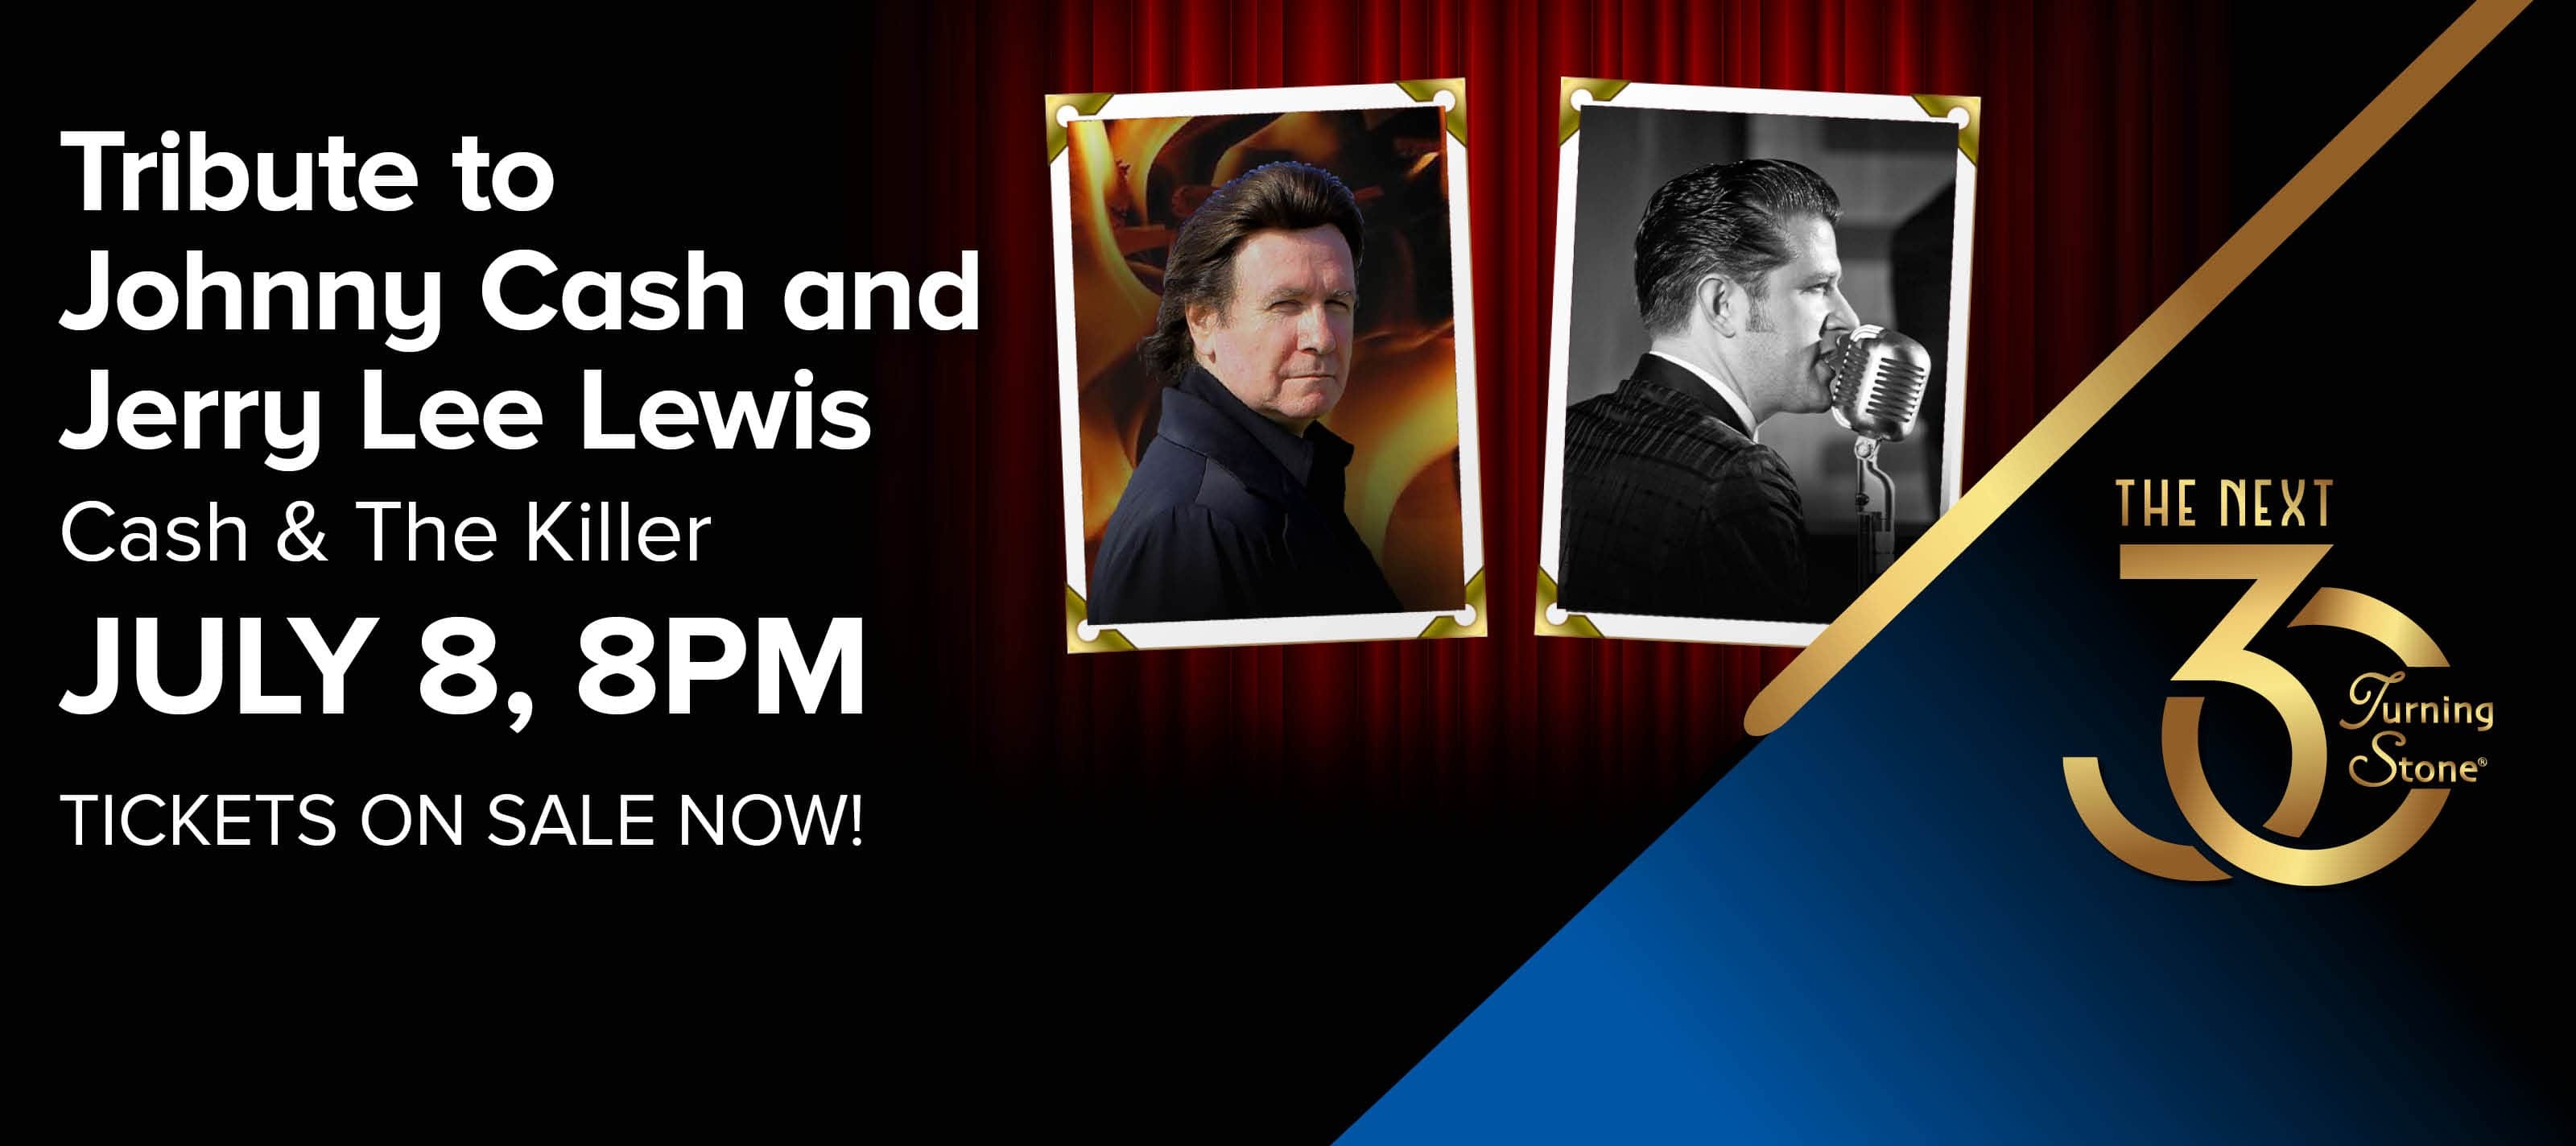 Tribute to Johnny Cash and Jerry Lee Lewis Cash & The Killer July 8 8pm Tickets On Sale Now